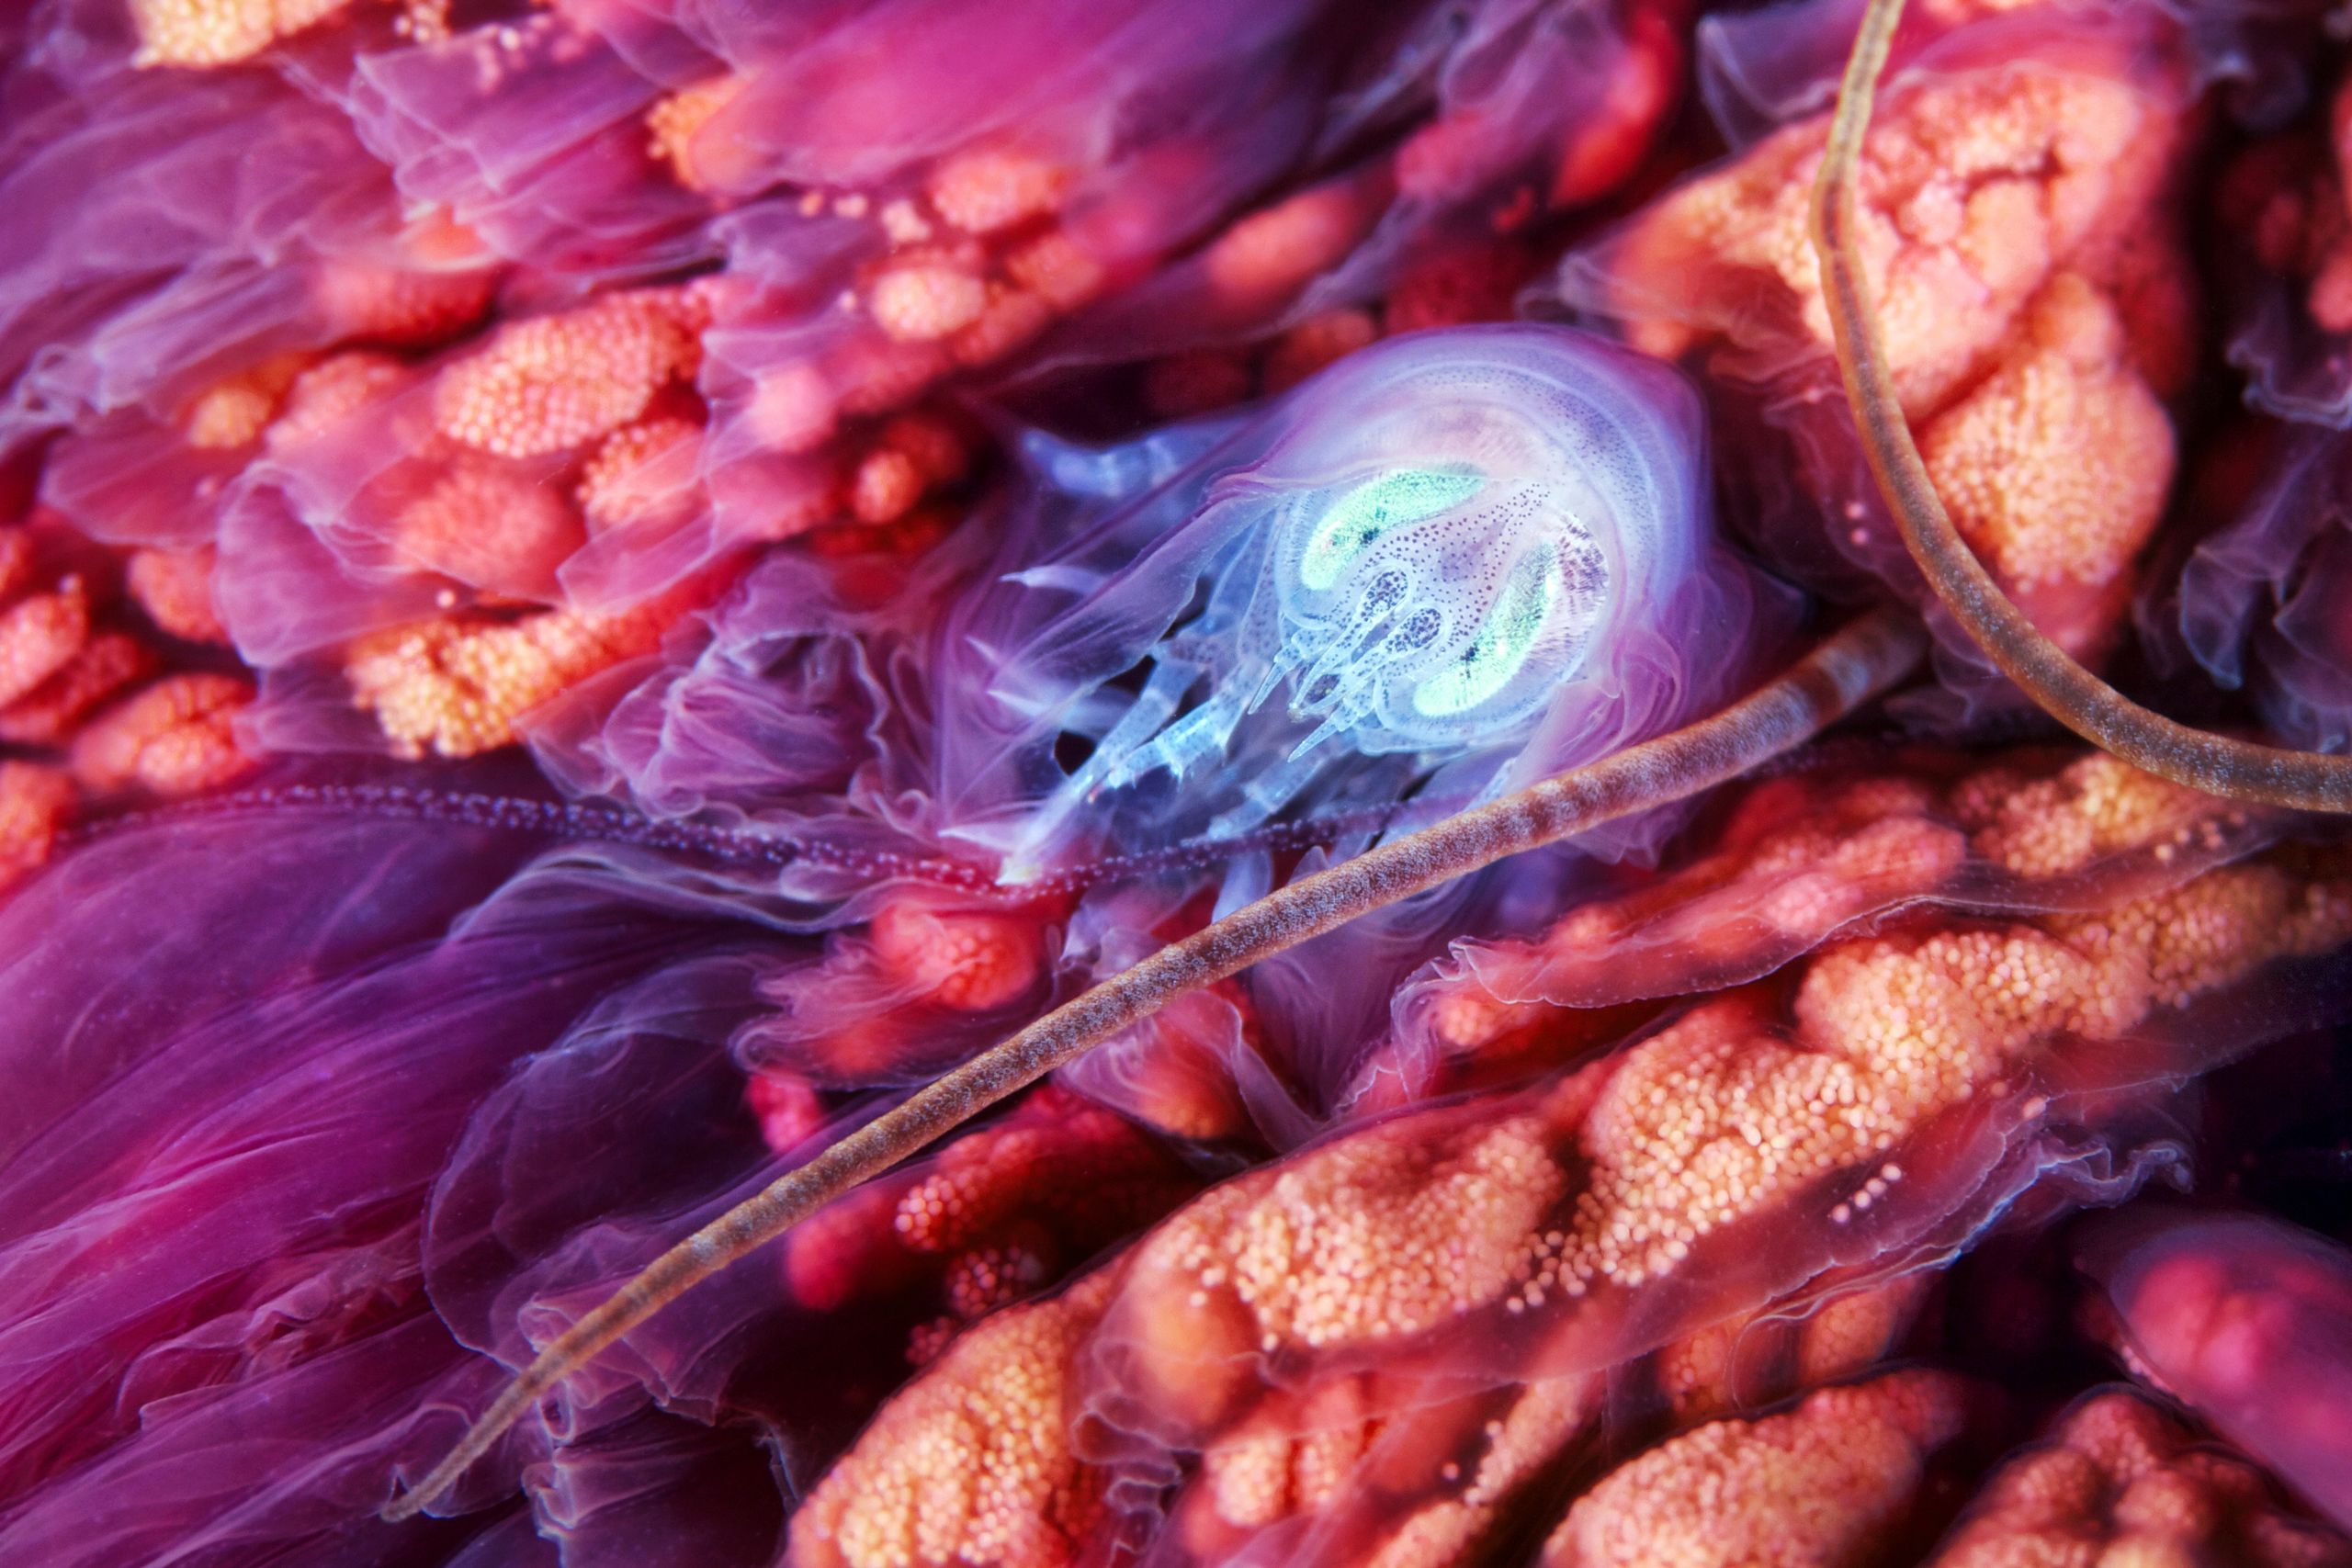 A species of zooplankton is surrounded by the pink and purple colours of a jellyfish.